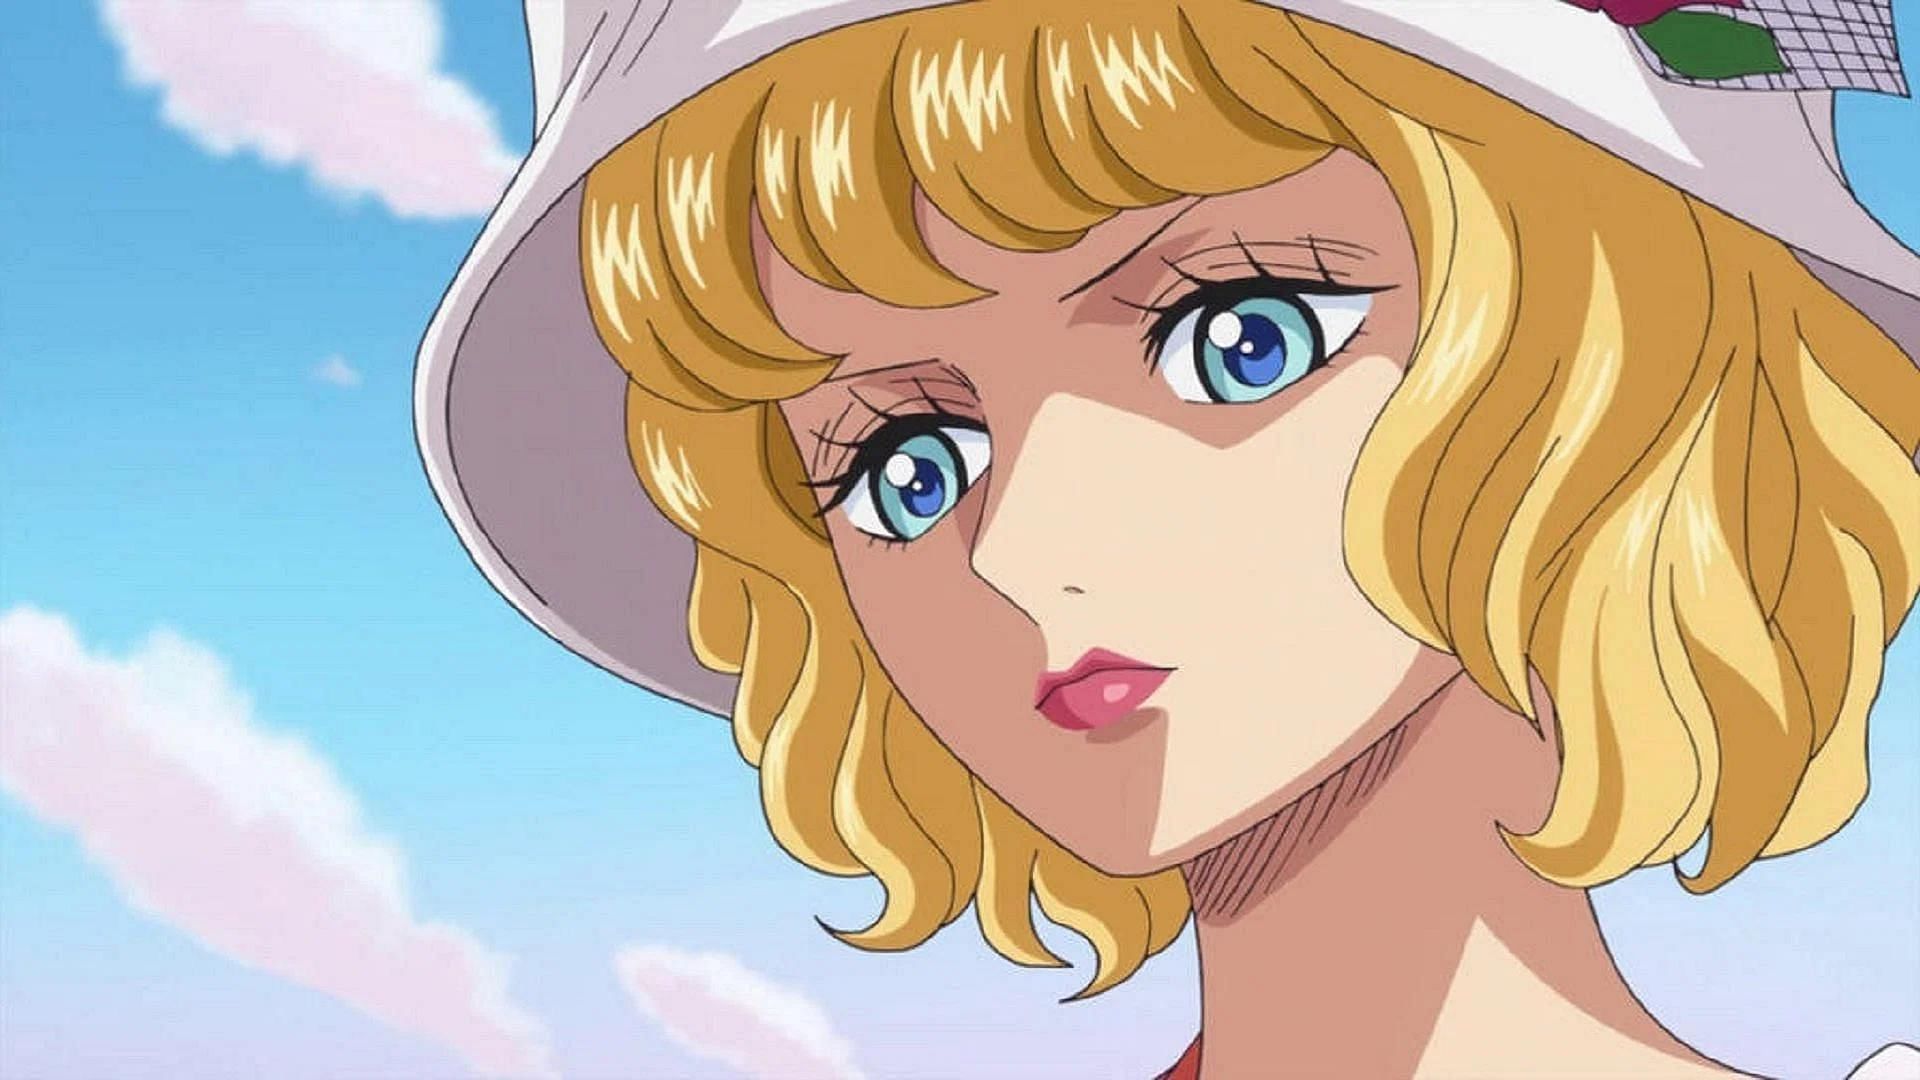 Stussy as shown in the anime (Image via Toei Animation)